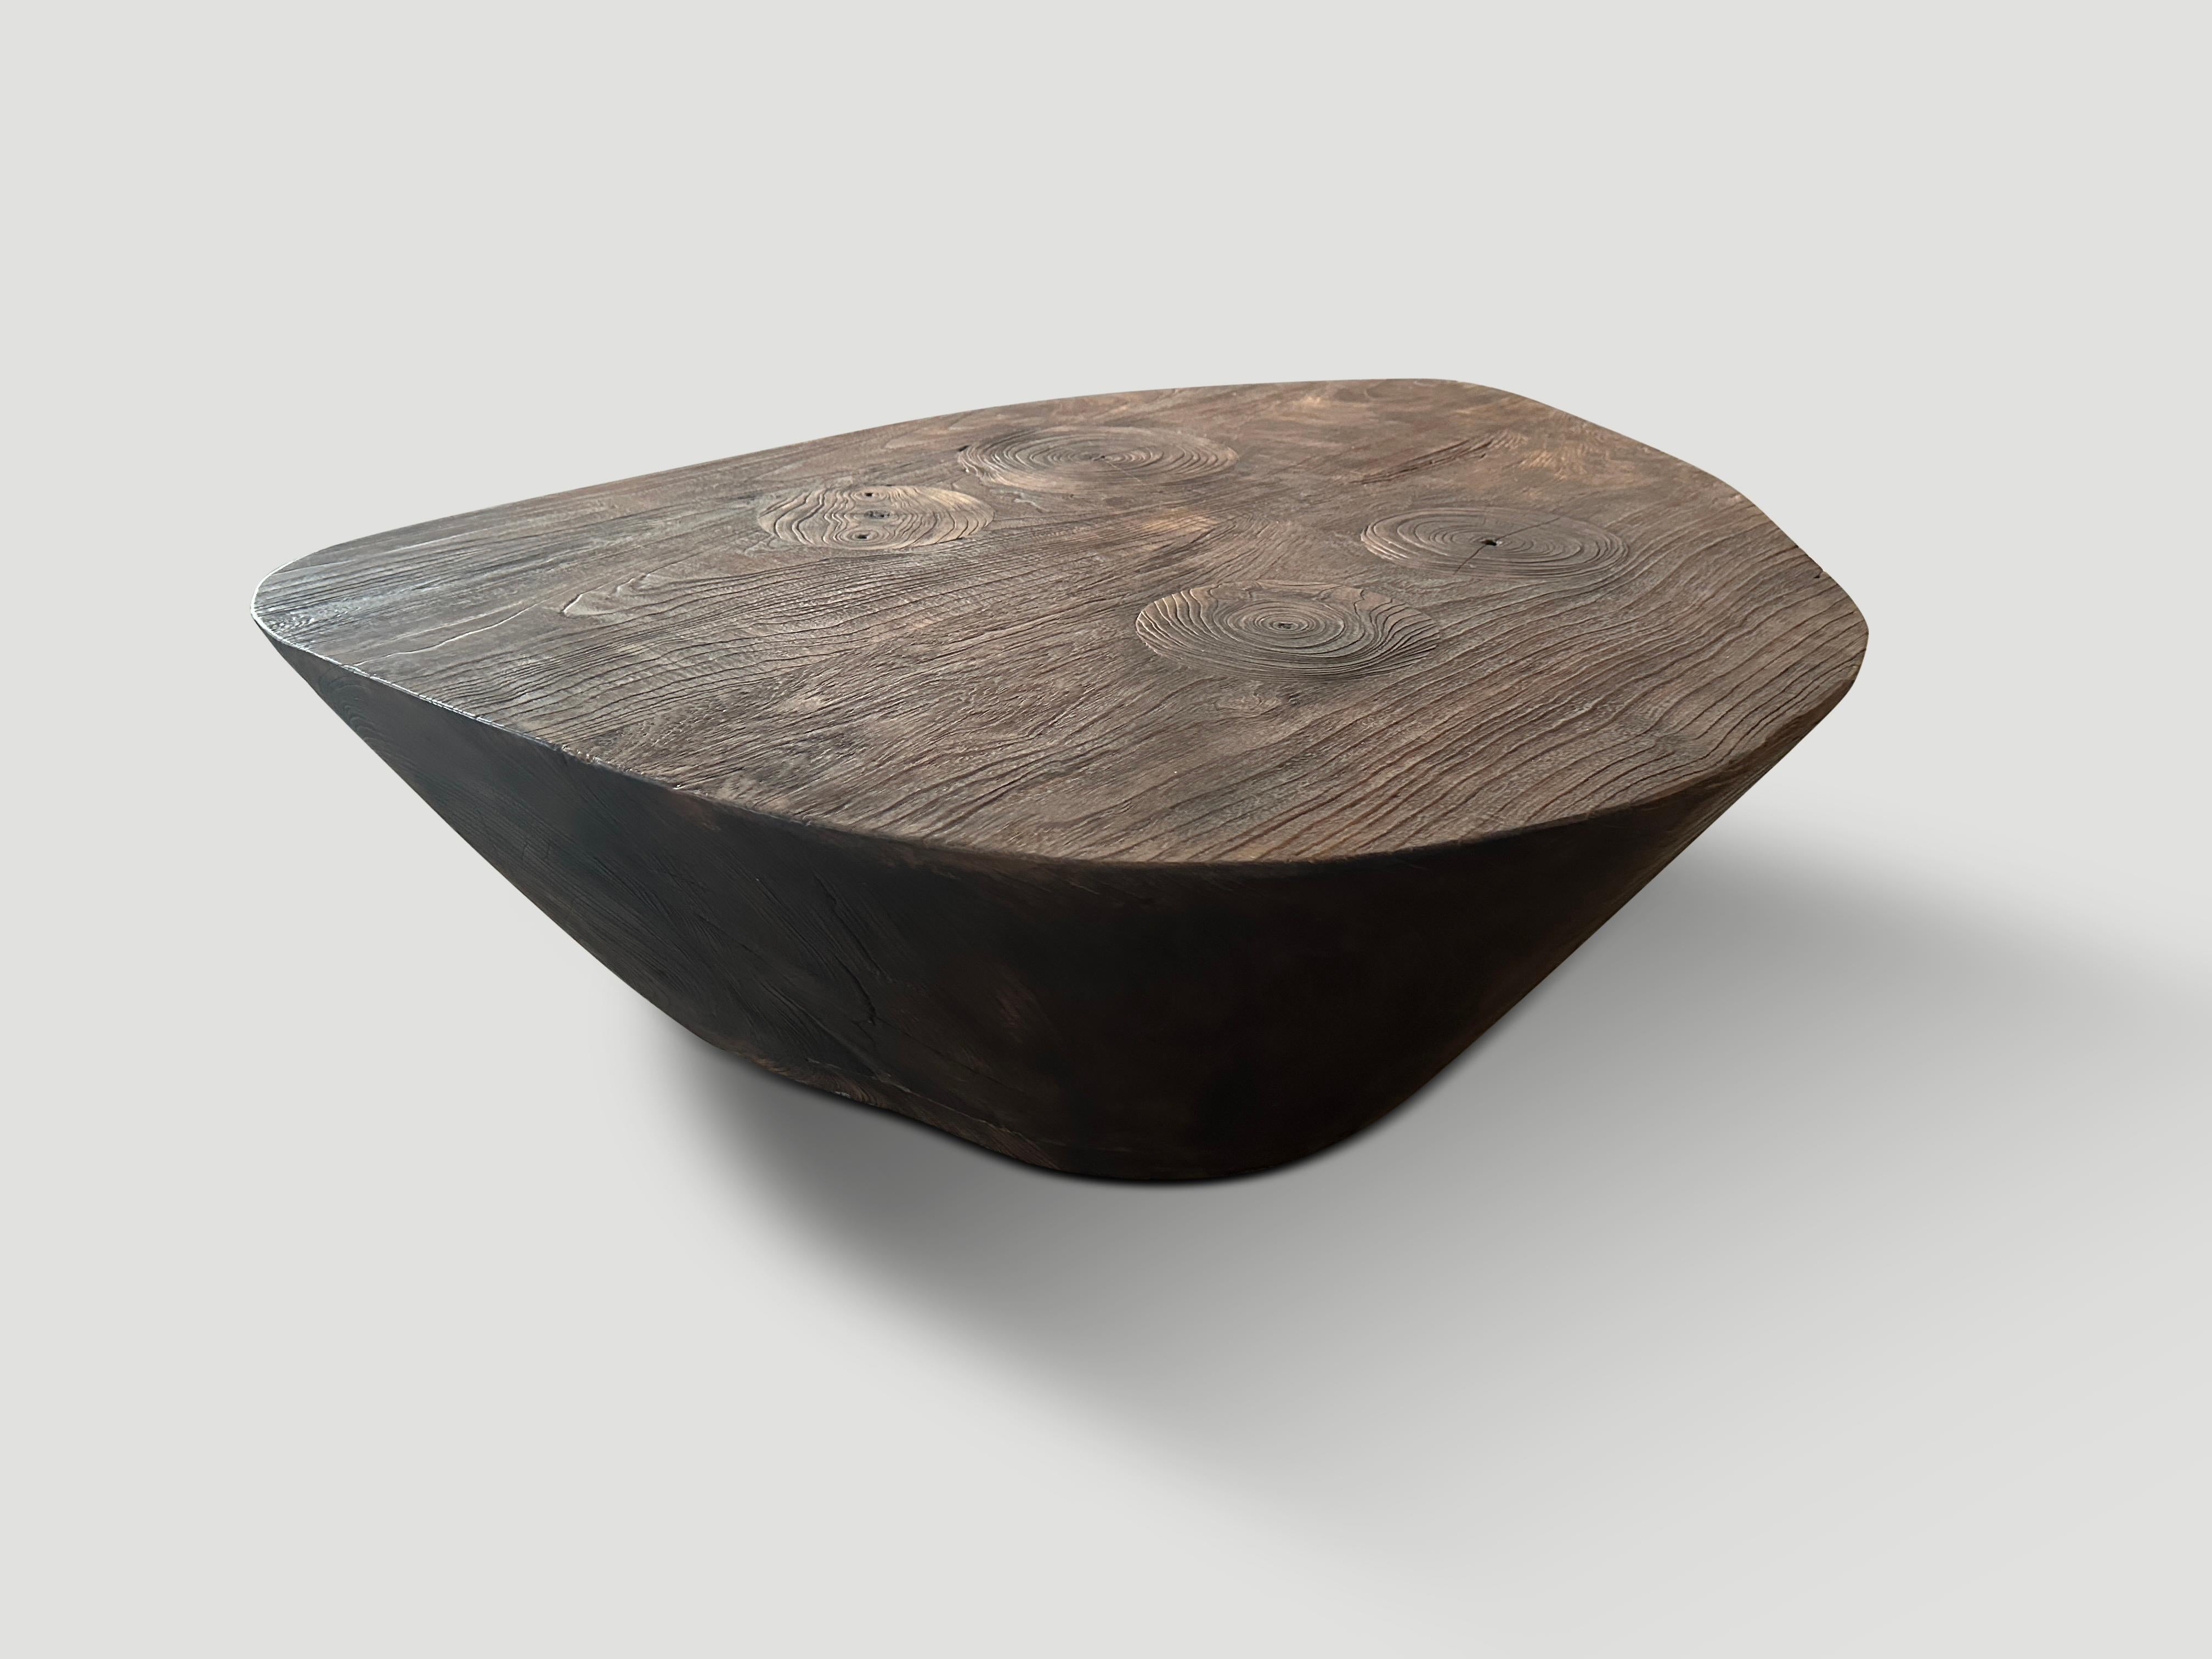 Beautiful reclaimed teak wood minimalist coffee table. Charred one time revealing the unique wood grain. Hand carved with a dramatic graduation from the bottom to the top. Both sculptural and usable. It’s all in the details. 

The Triple Burnt